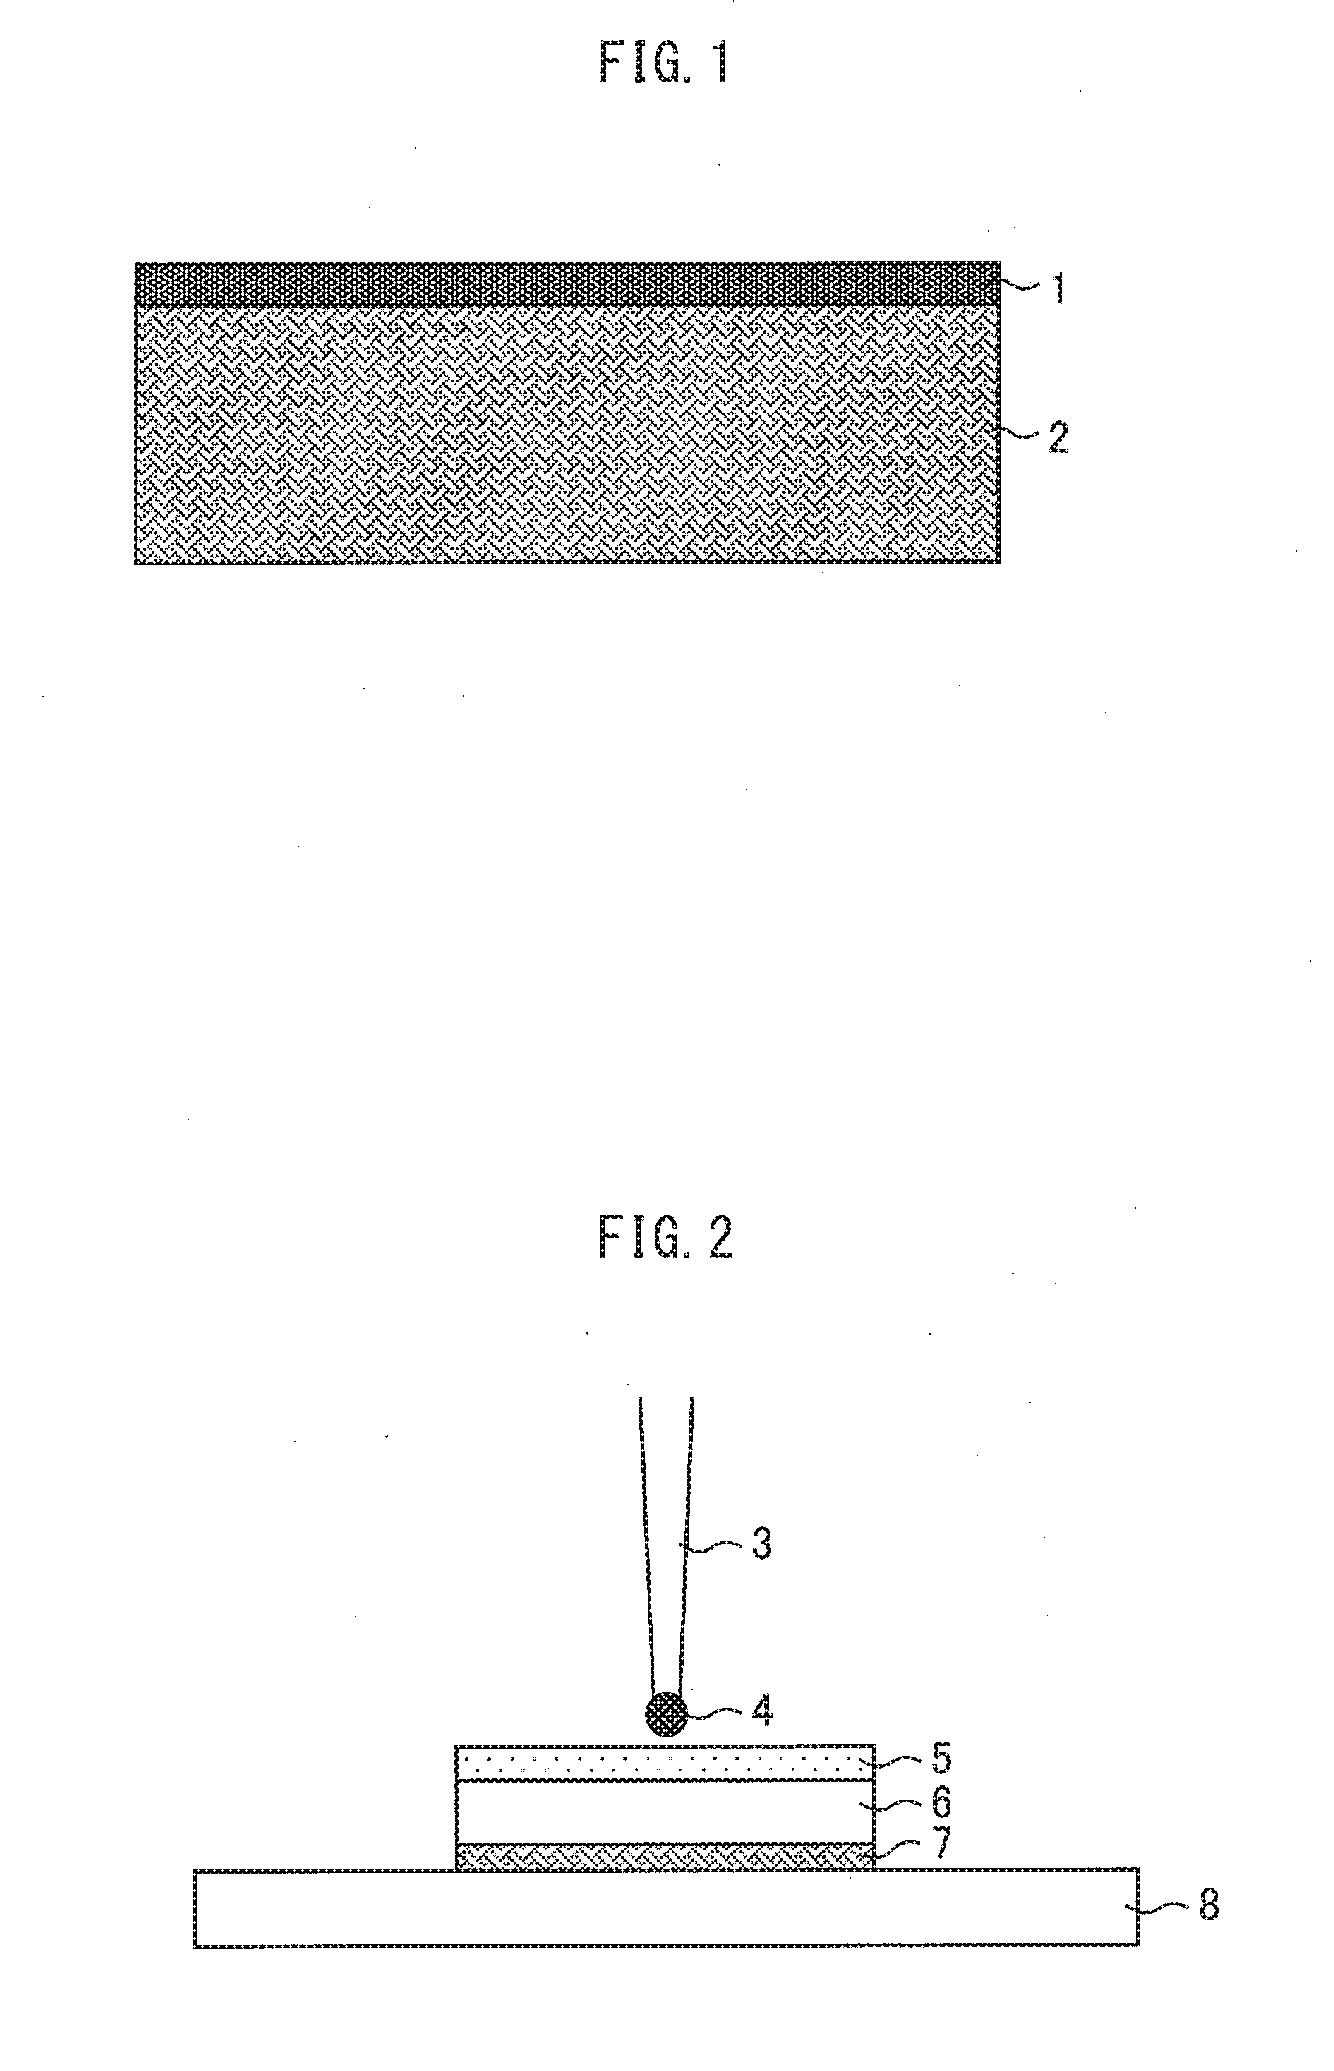 Laminated body, separator, and nonaqueous secondary battery